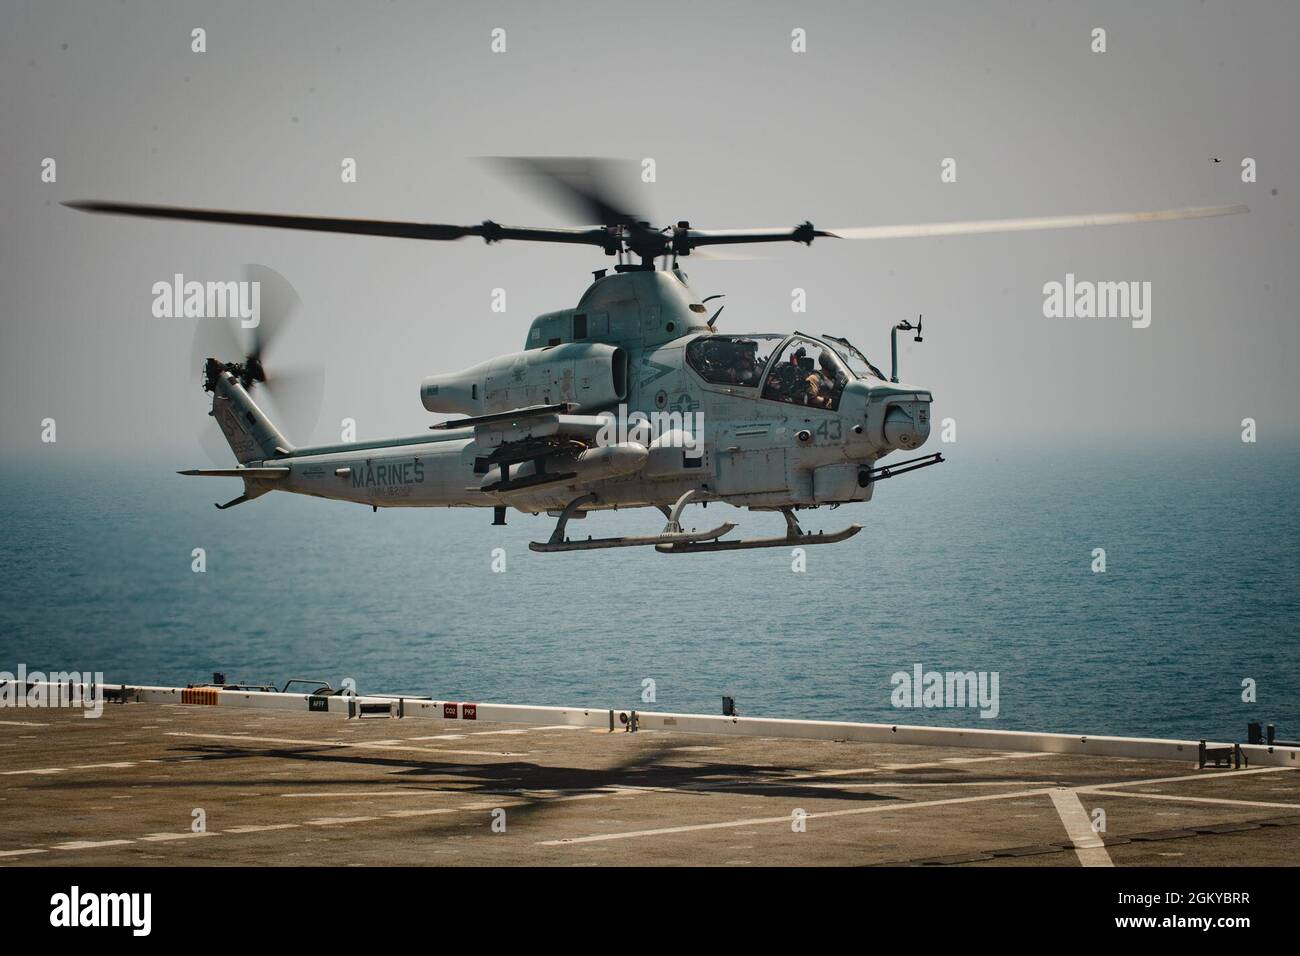 210727-N-KZ419-1071 ARABIAN GULF (July 27, 2021) – An AH-1W Super Cobra attached to Marine Medium Tiltrotor Squadron (VMM) 162 lands aboard expeditionary sea base USS Lewis B. Puller (ESB 3) during flight operations in the Arabian Gulf, July 27. Lewis B. Puller is deployed to the U.S. 5th Fleet area of operations in support of naval operations to ensure maritime stability and security in the Central Region, connecting the Mediterranean and Pacific through the western Indian Ocean and three strategic choke points. Stock Photo